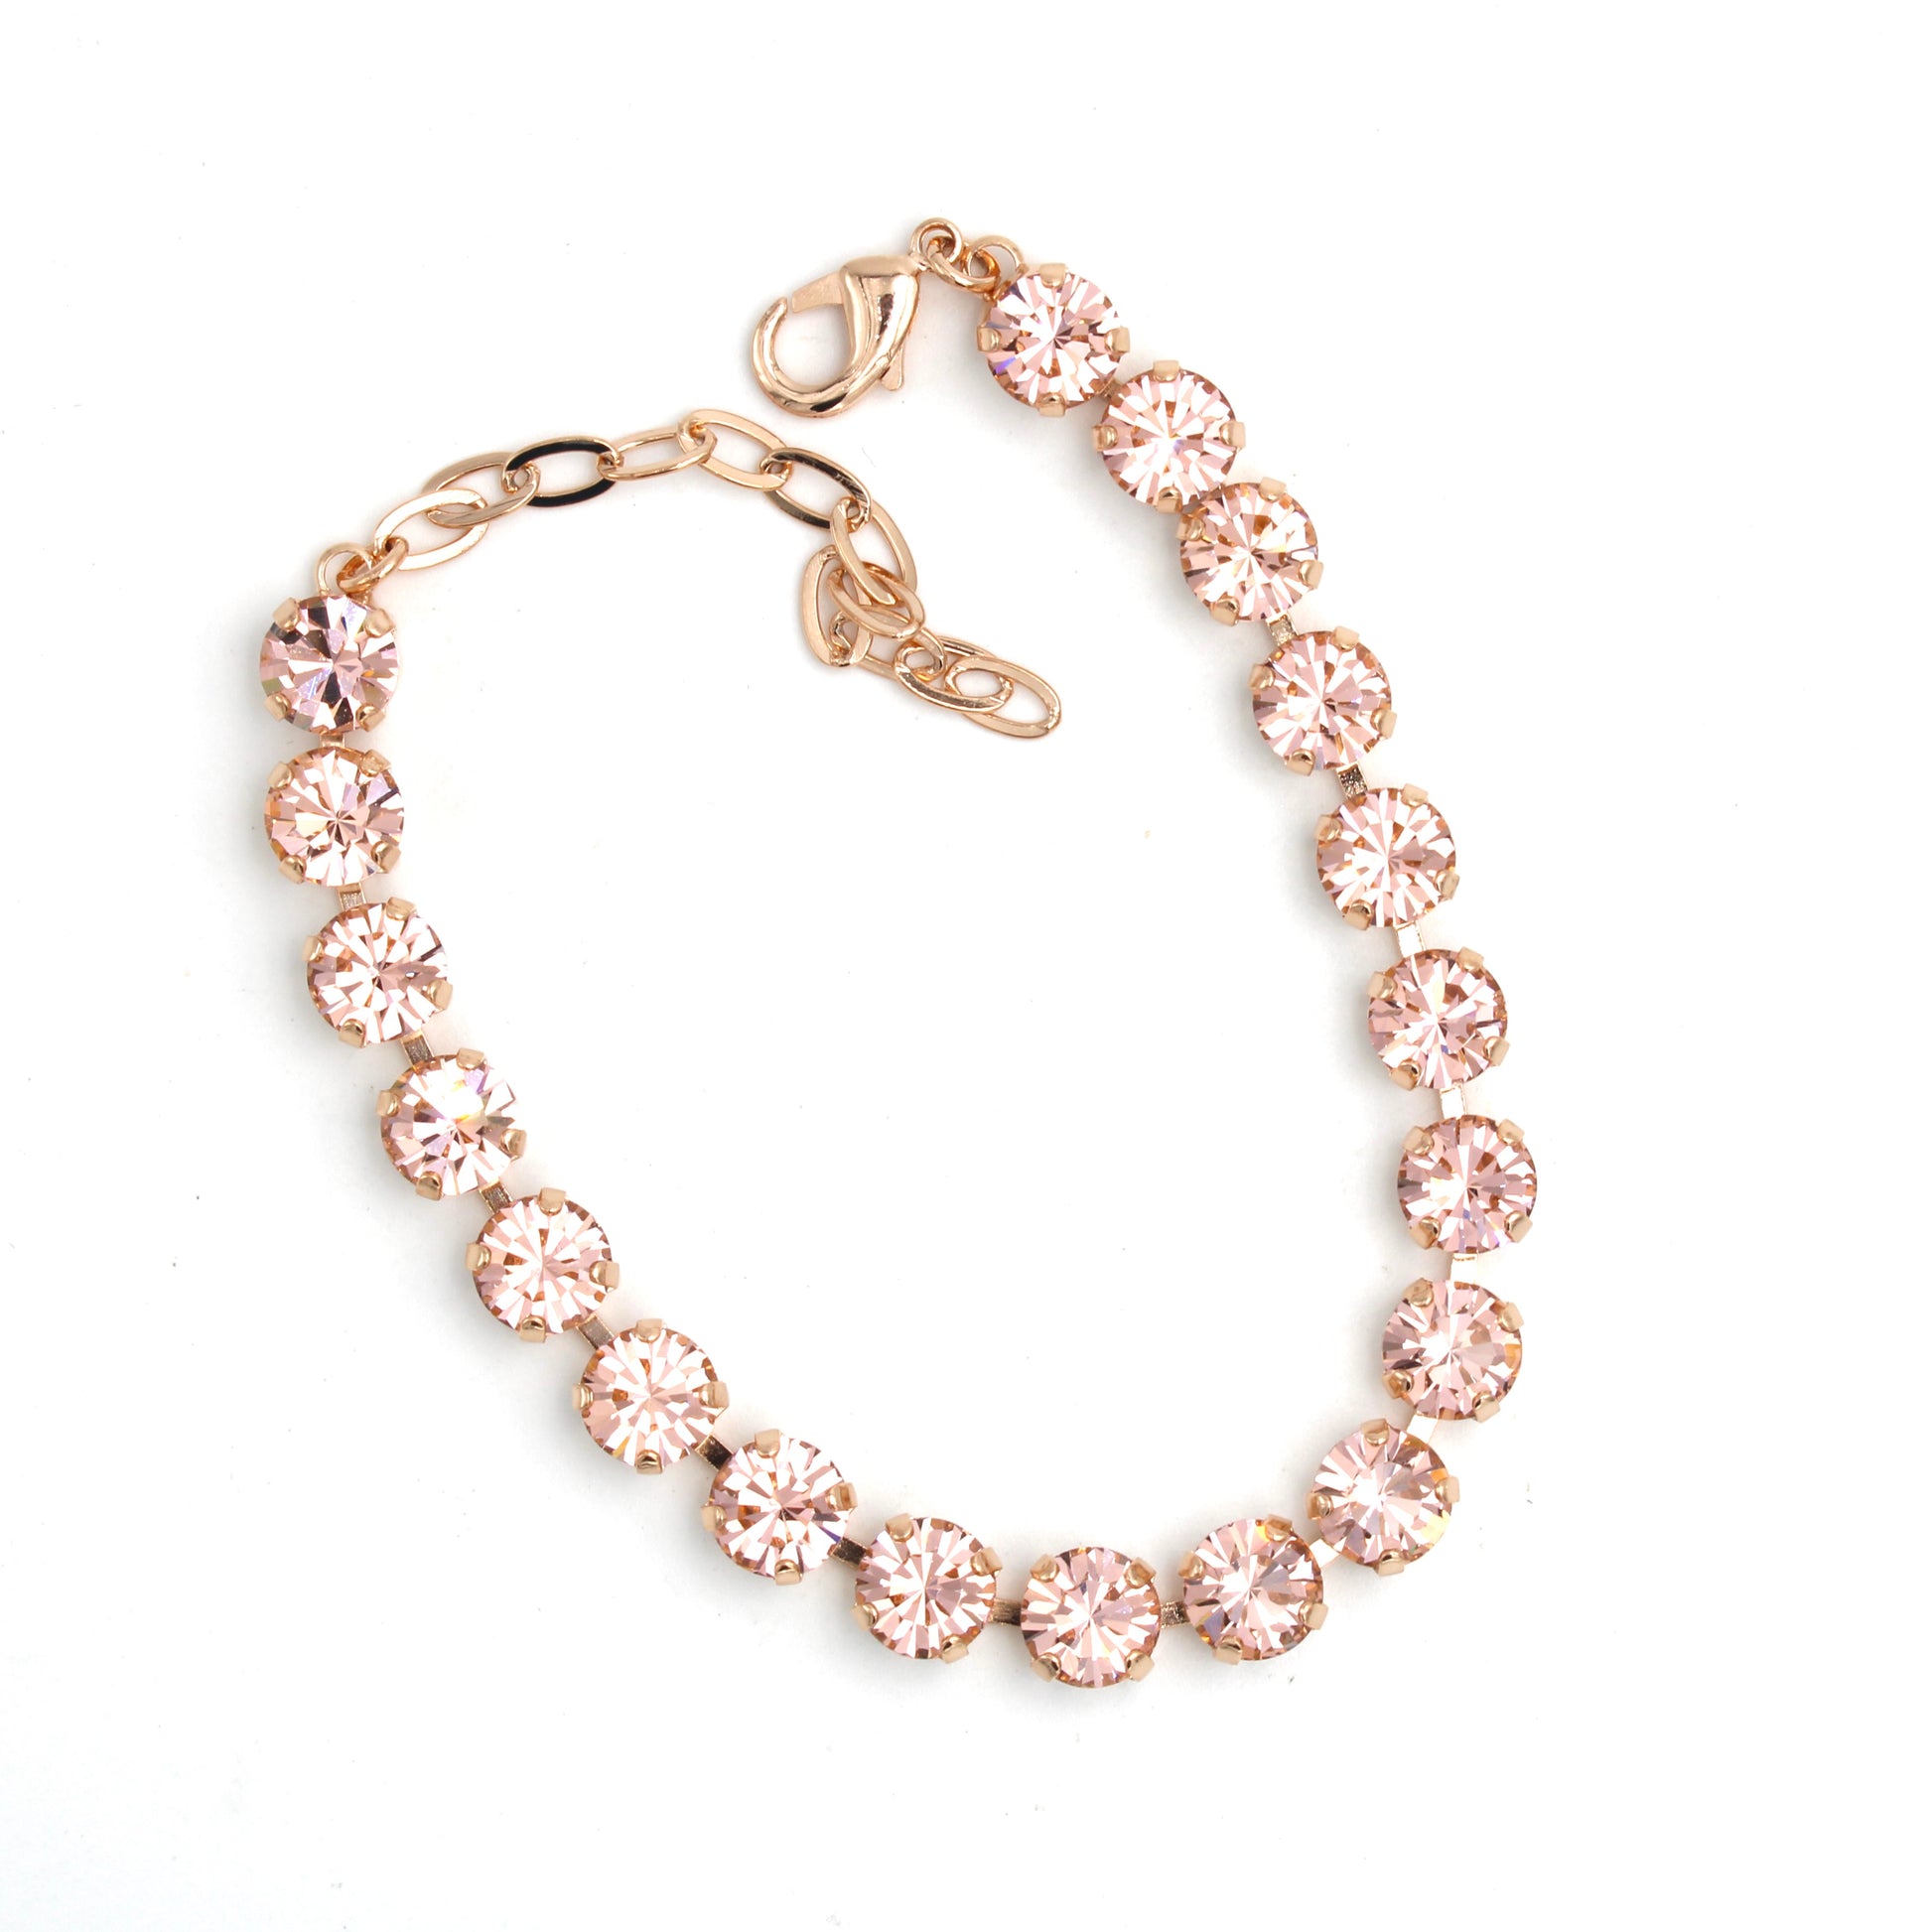 Peach Crystal Anklet in Rose Gold - MaryTyke's